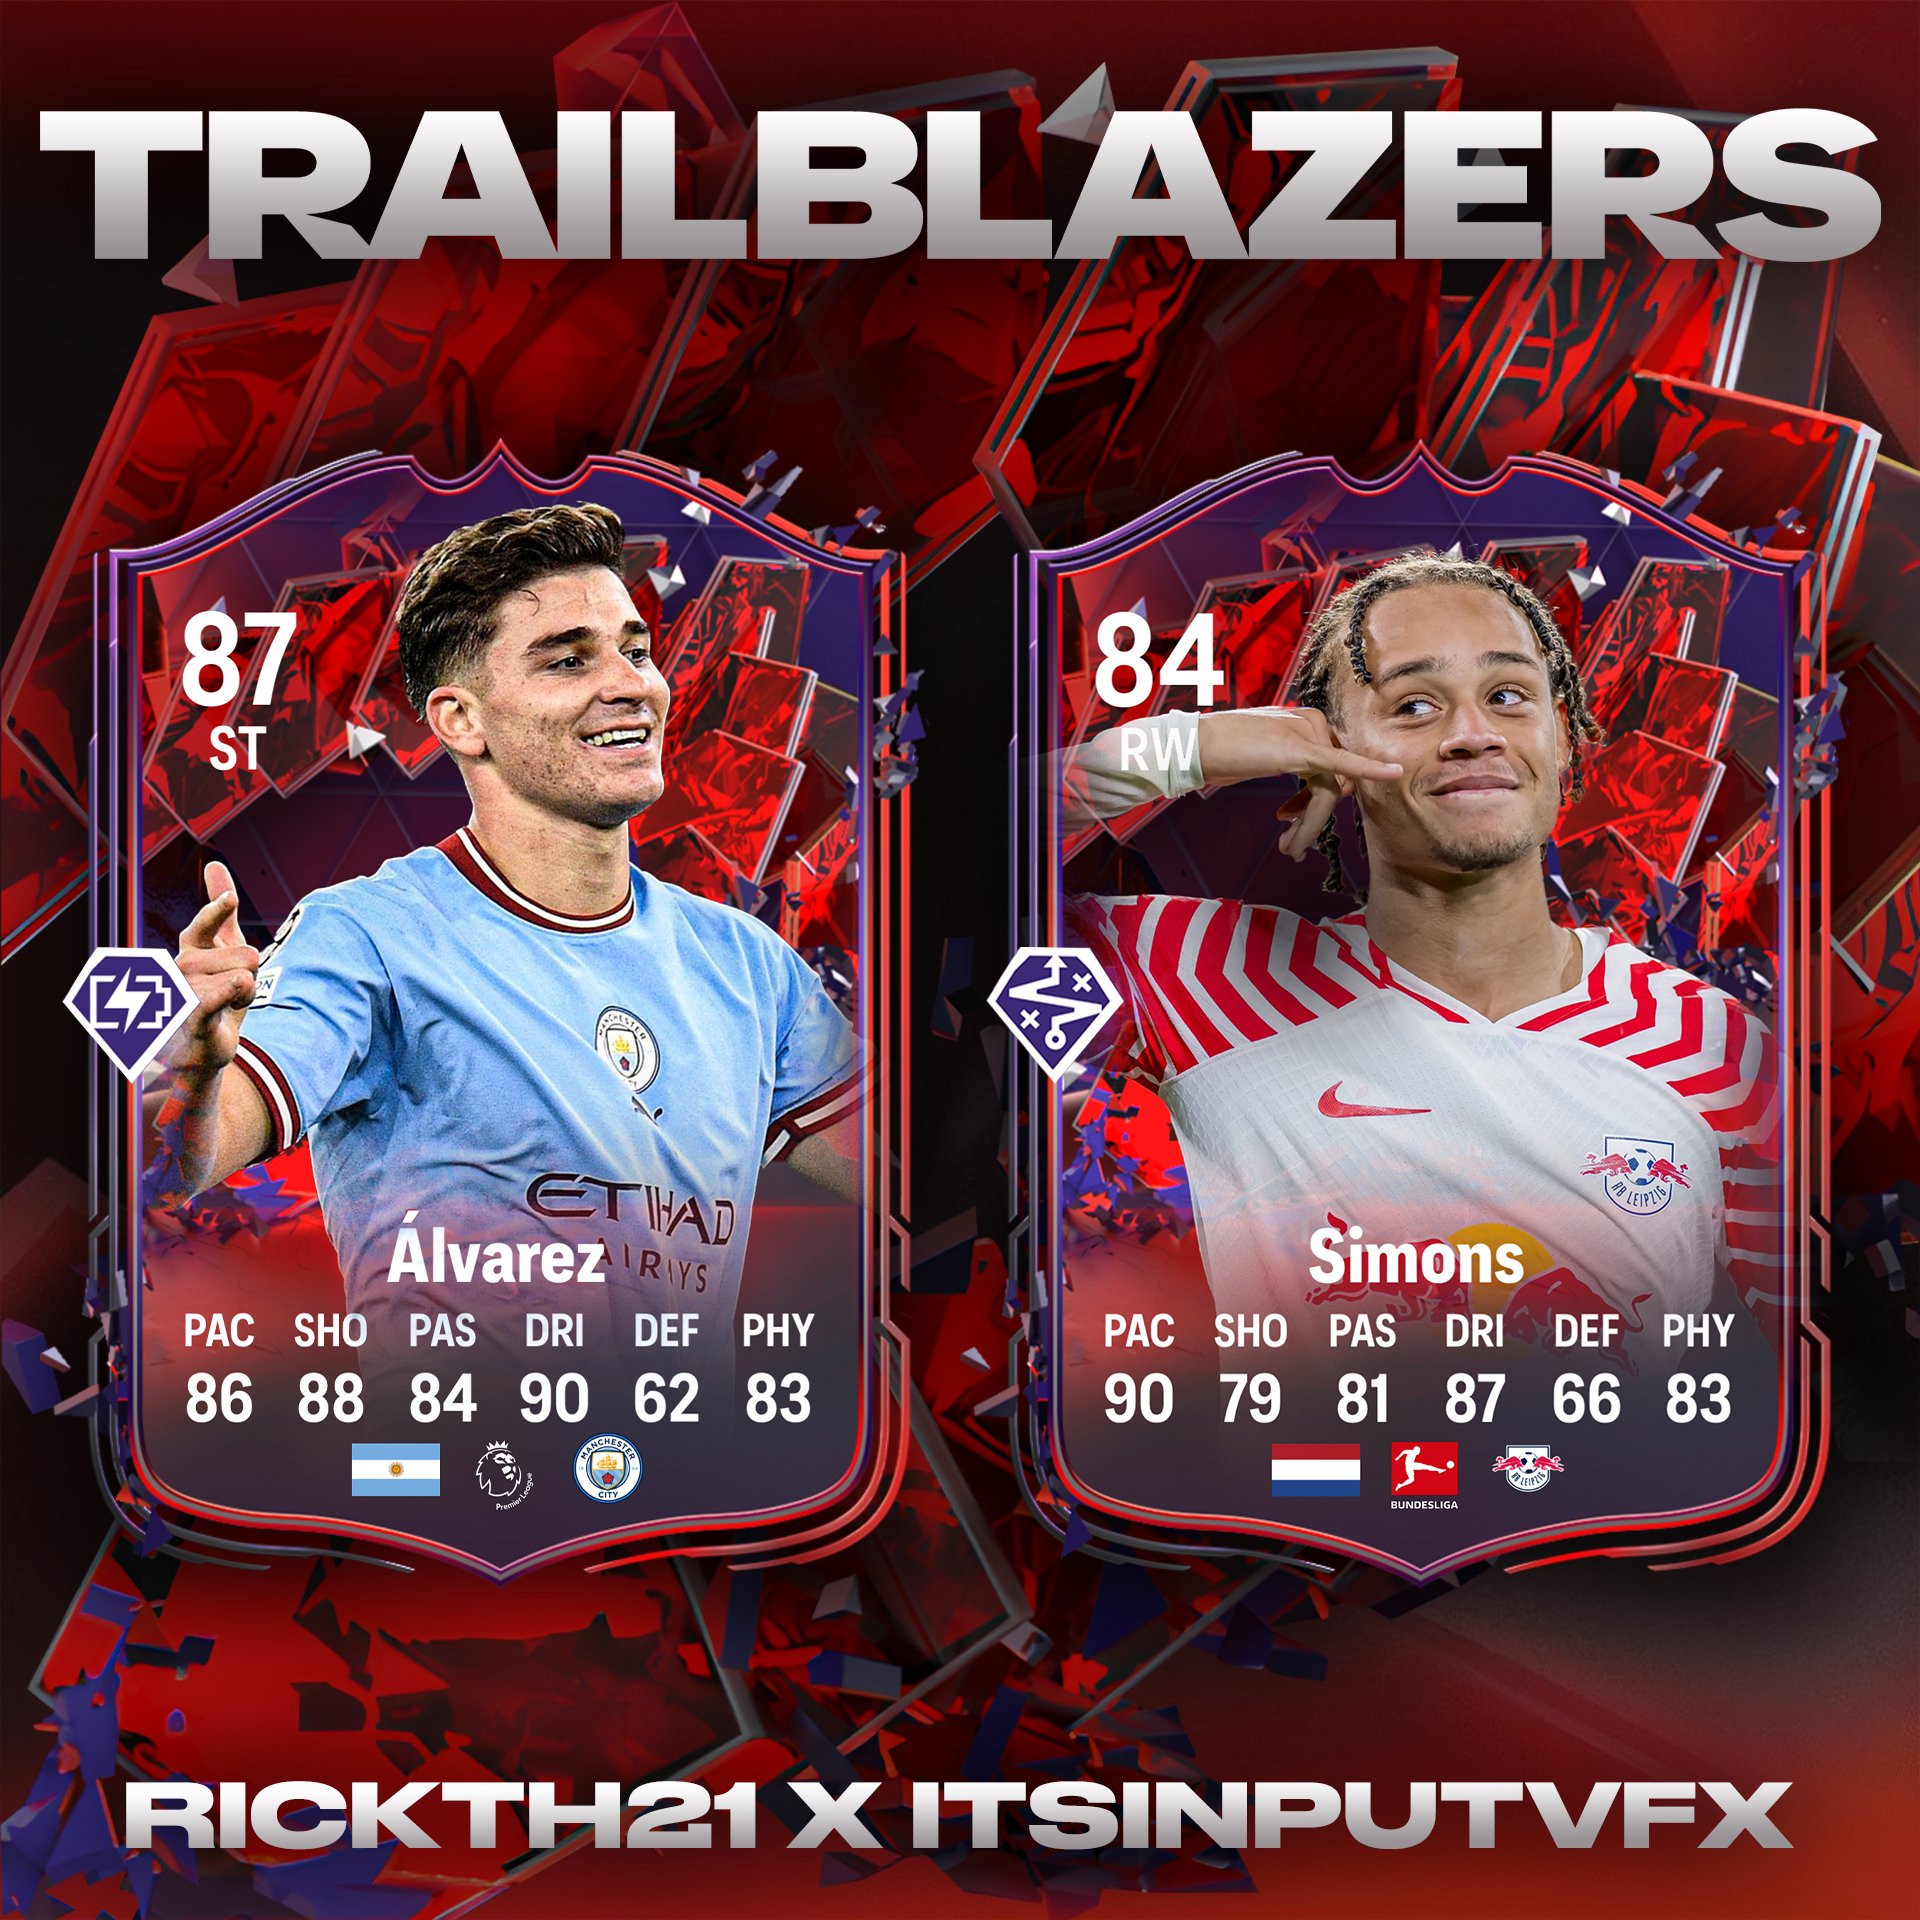 🚨Rice🏴󠁧󠁢󠁥󠁮󠁧󠁿 is coming as SBC during TRAILBLAZERS promo